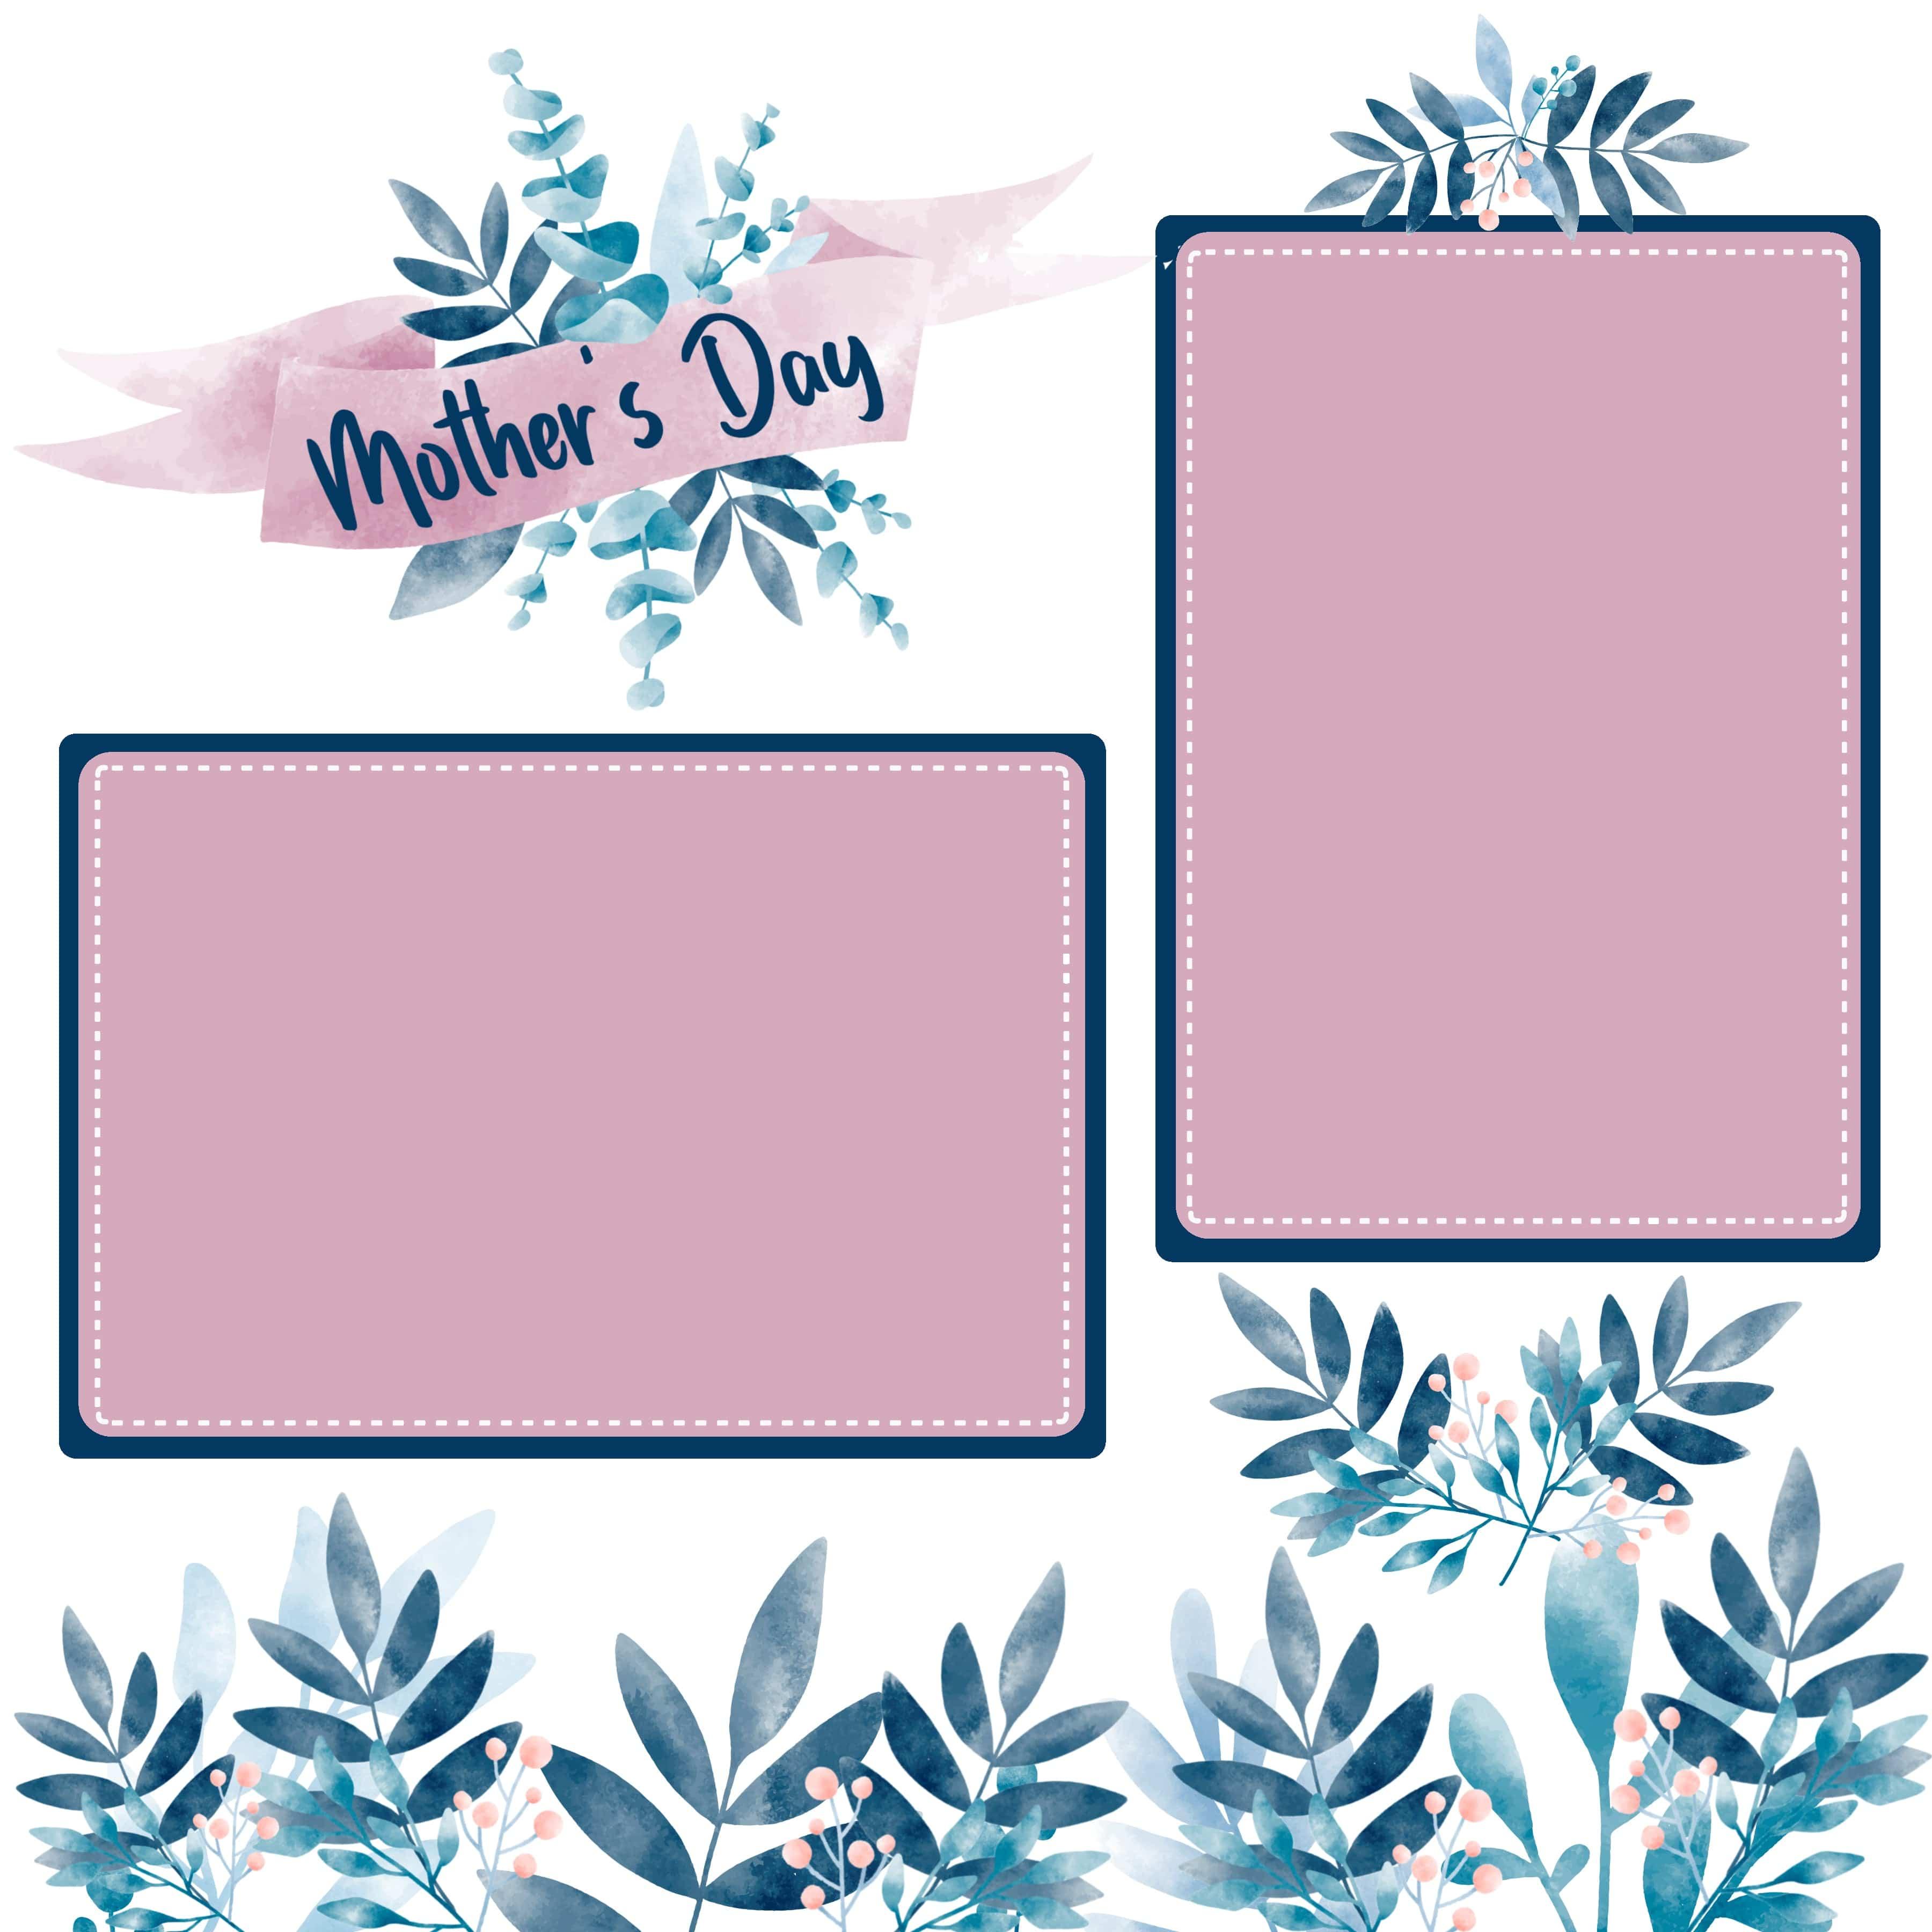 Mother's Day 2022 (2) - 12 x 12 Premade, Printed Scrapbook Pages by SSC Designs - Scrapbook Supply Companies